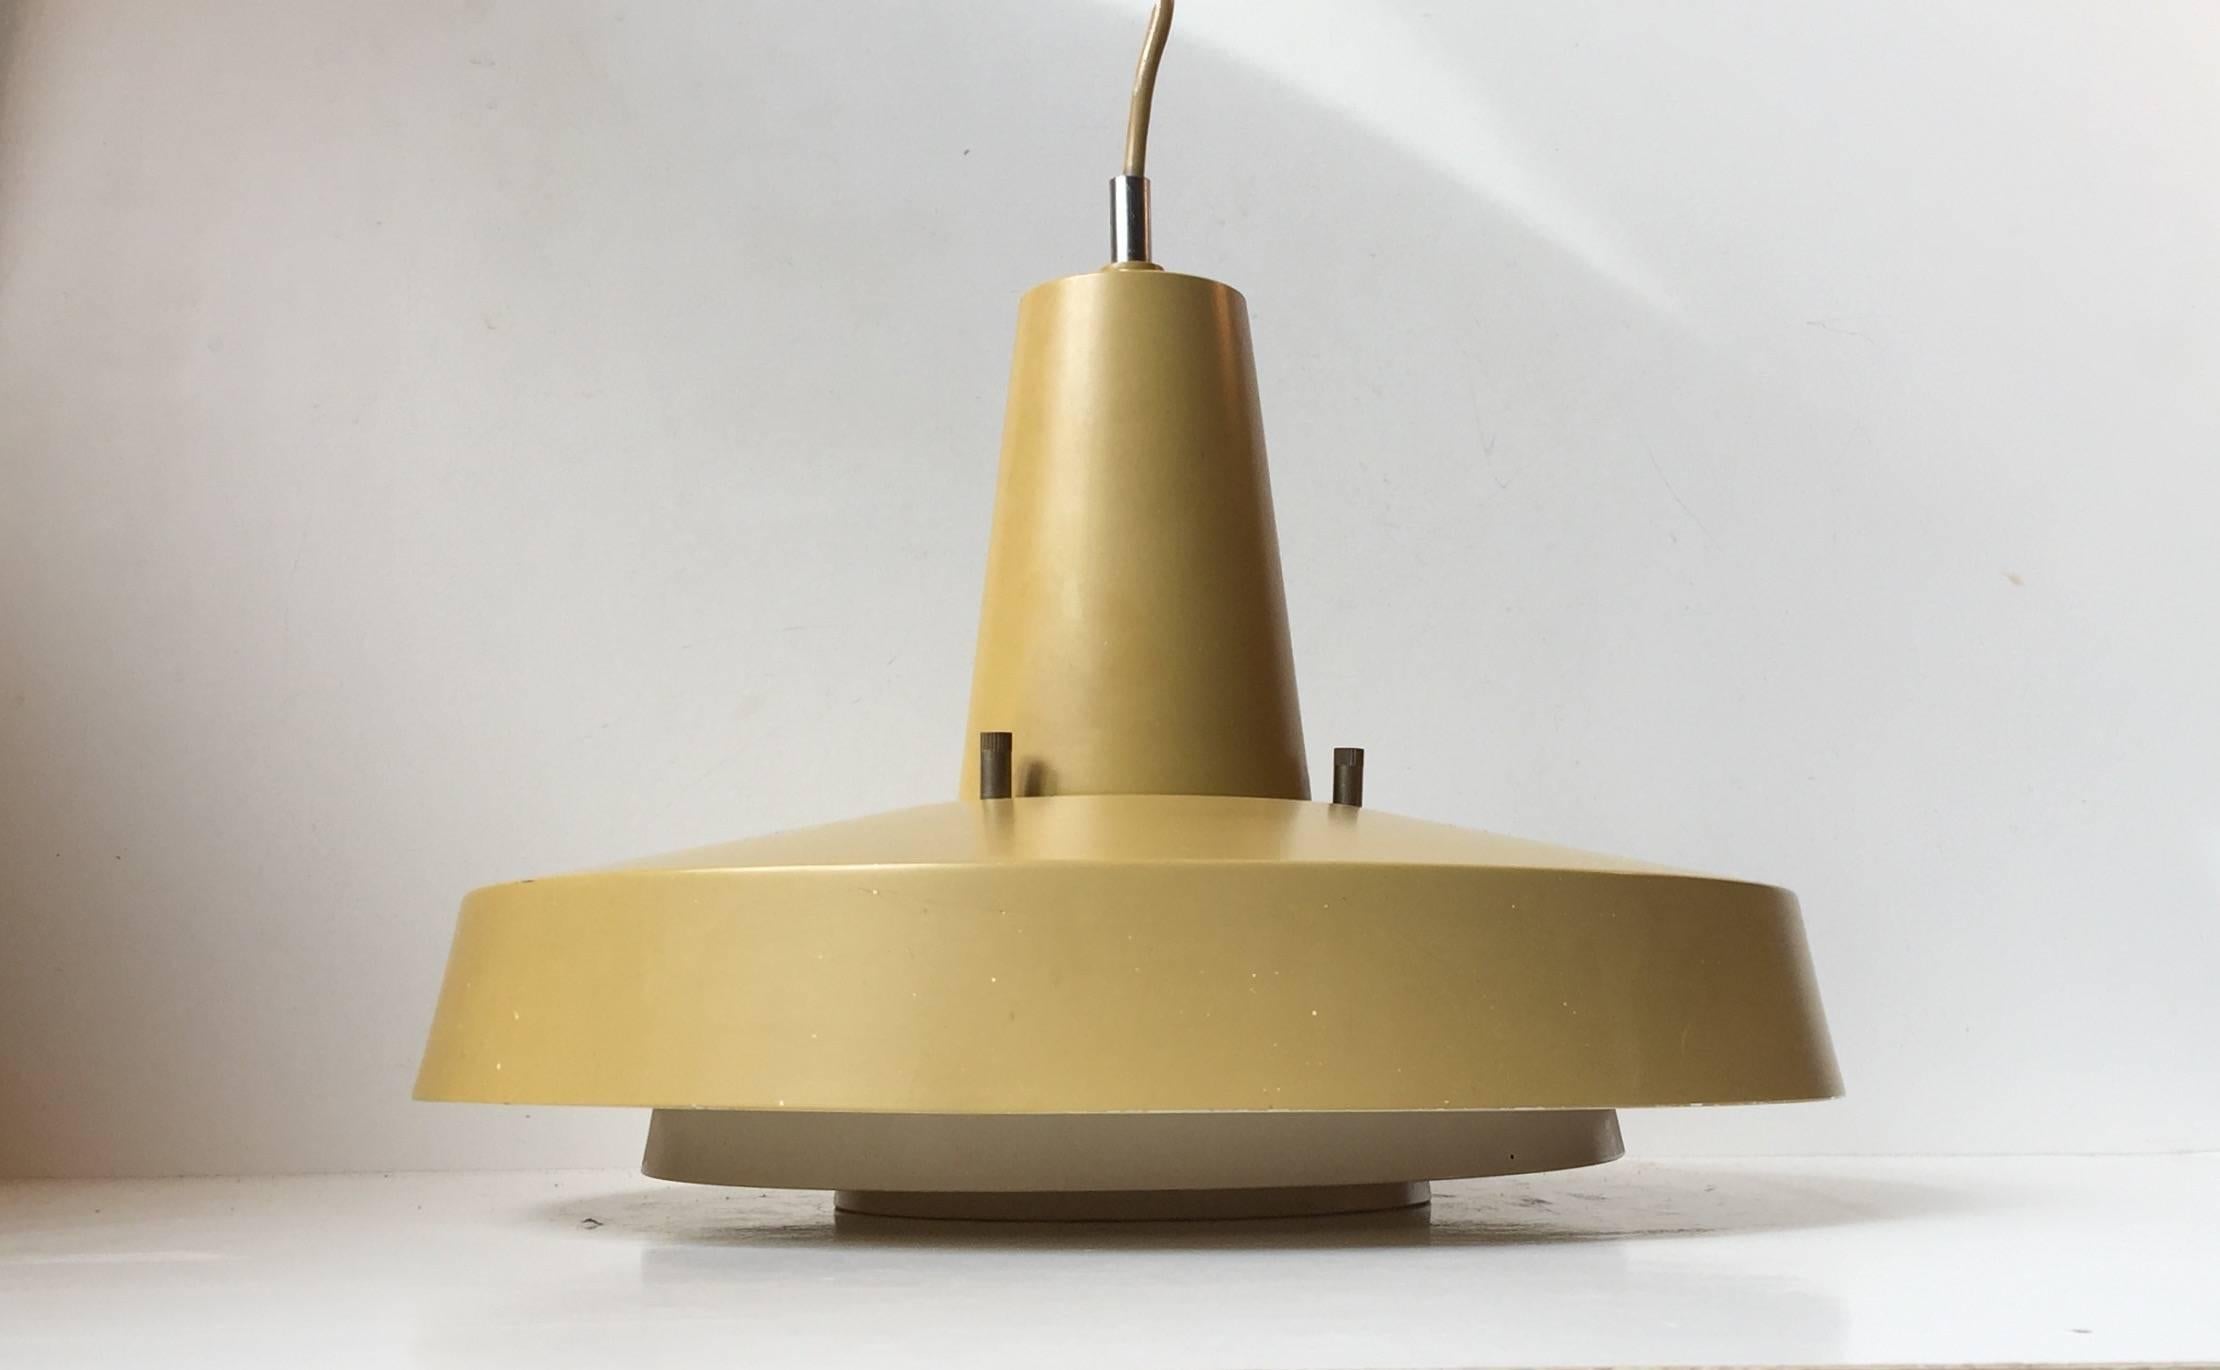 This matté mustard/yellow hanging light was manufactured by Lyfa in Denmark. It was designed by Eva & Nils Koppel in the mid-late 1960s. It features the original porcelain fitting suitable for E27 lightbulbs up to 100 watts.